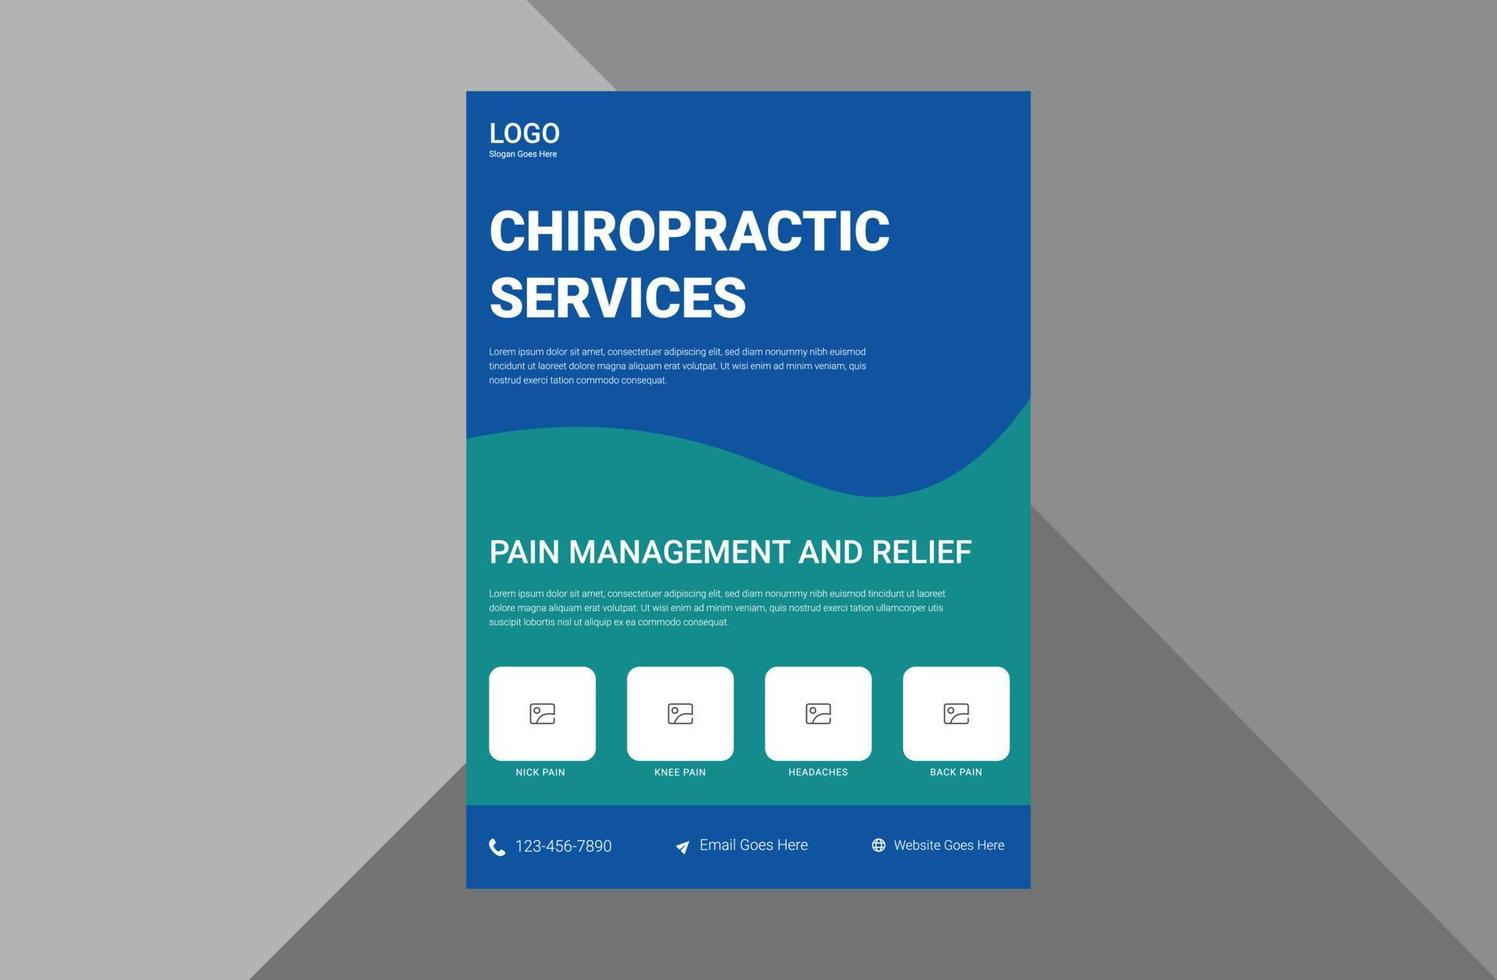 chiropractic services clinic flyer design. health care clinic service poster leaflet design. a4 template, brochure design, cover, flyer, poster, print-ready vector